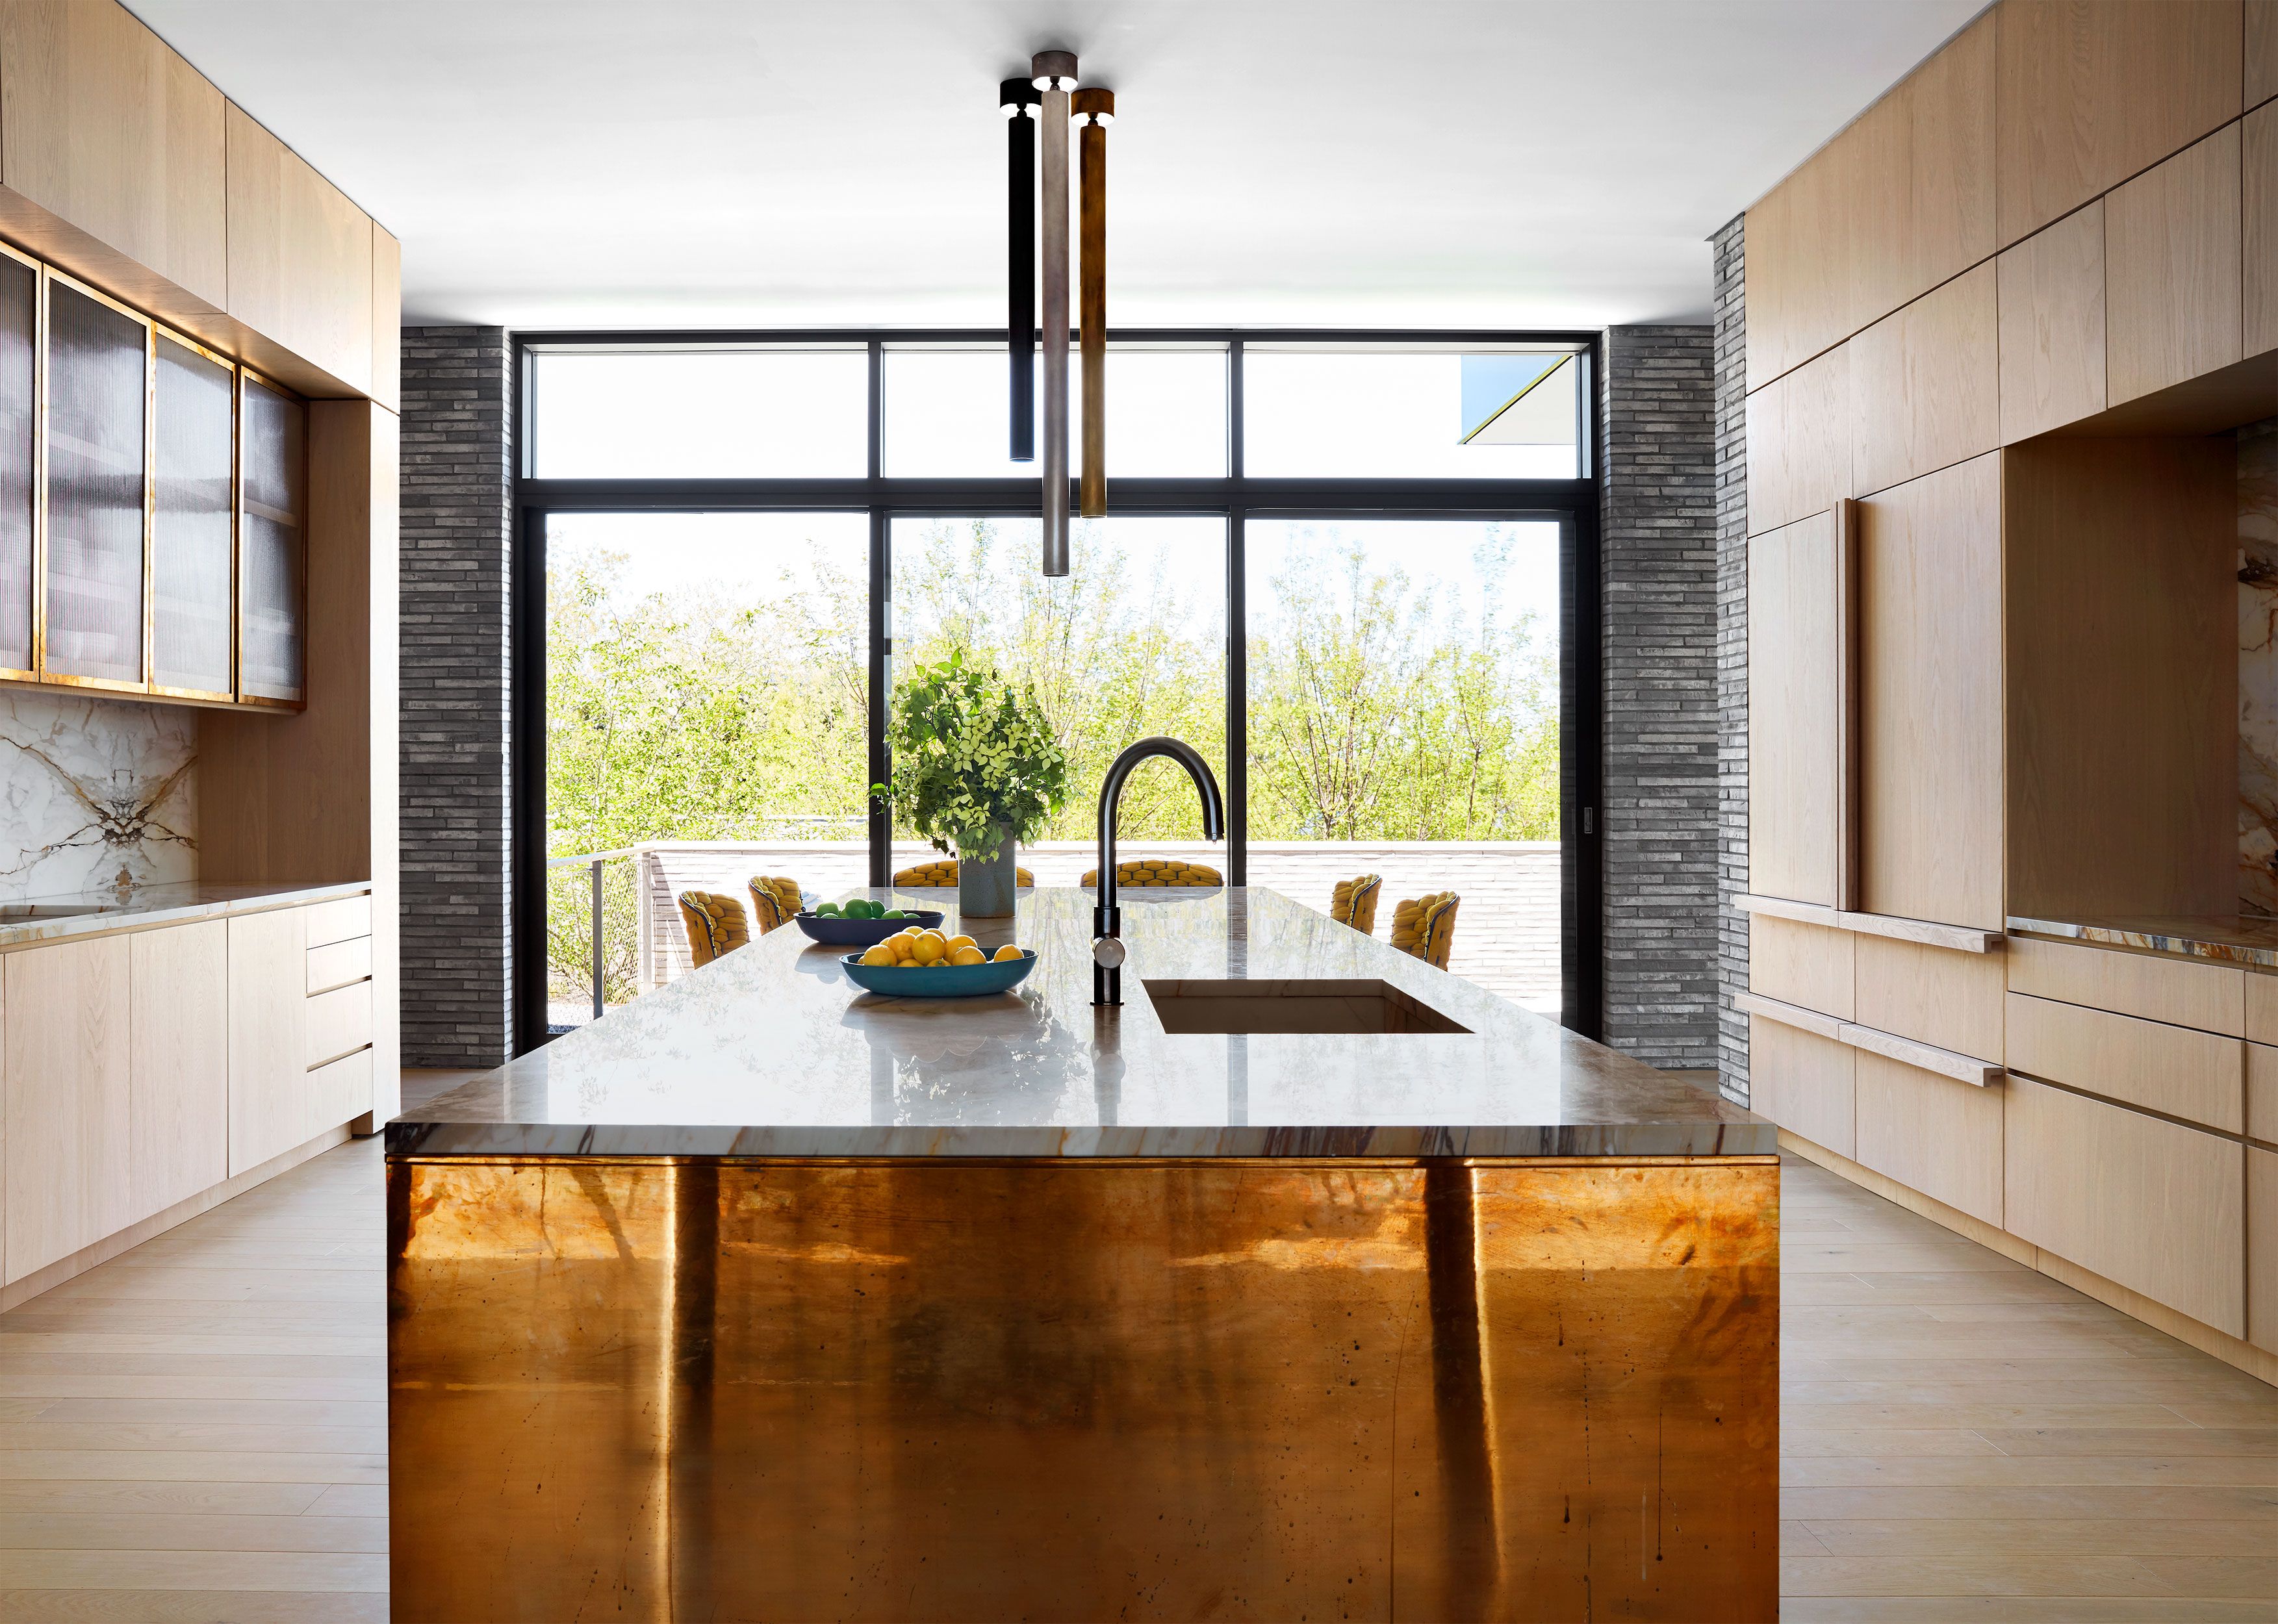 7 Kitchen Trends You'll Be Seeing Everywhere This Year | 2022 Kitchen Trends